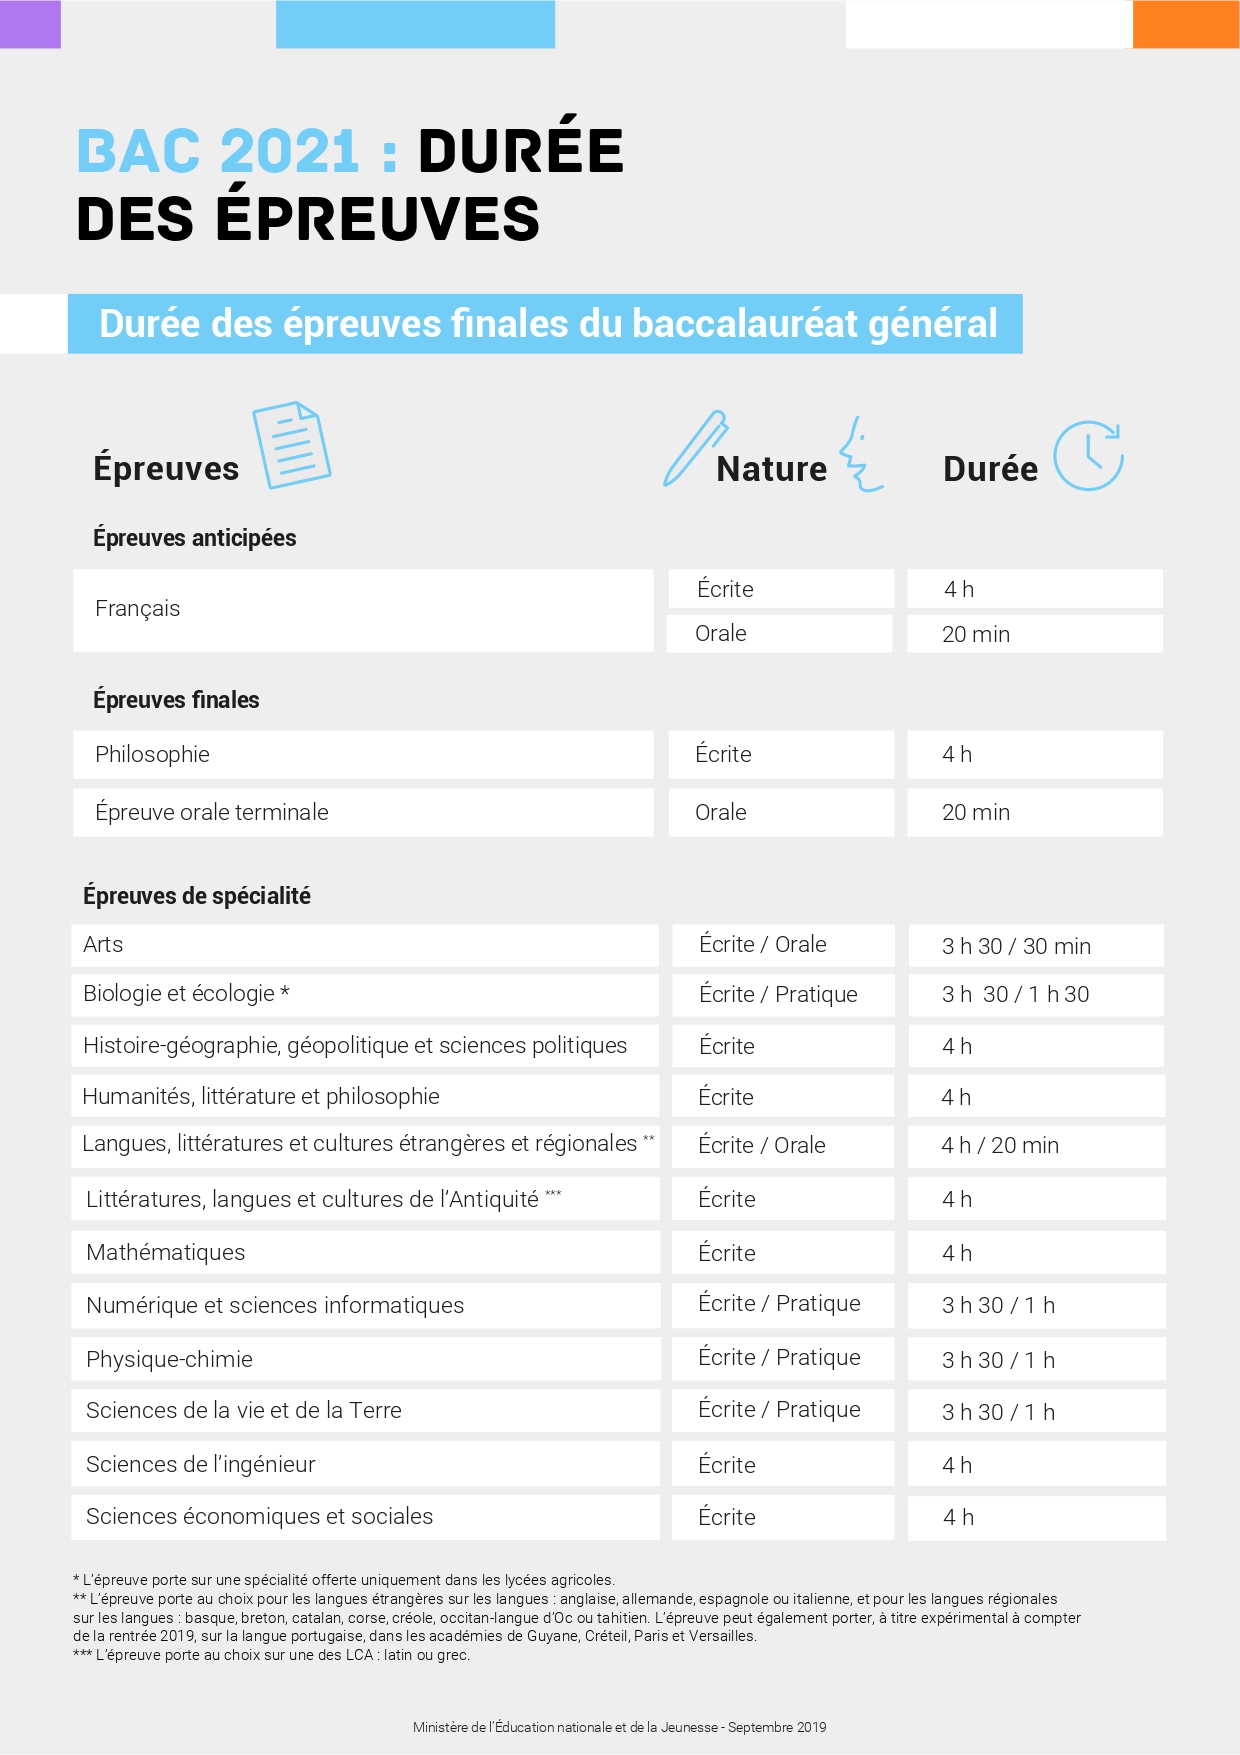 Epreuves calendrier duree BAC 2021 1 page 0002